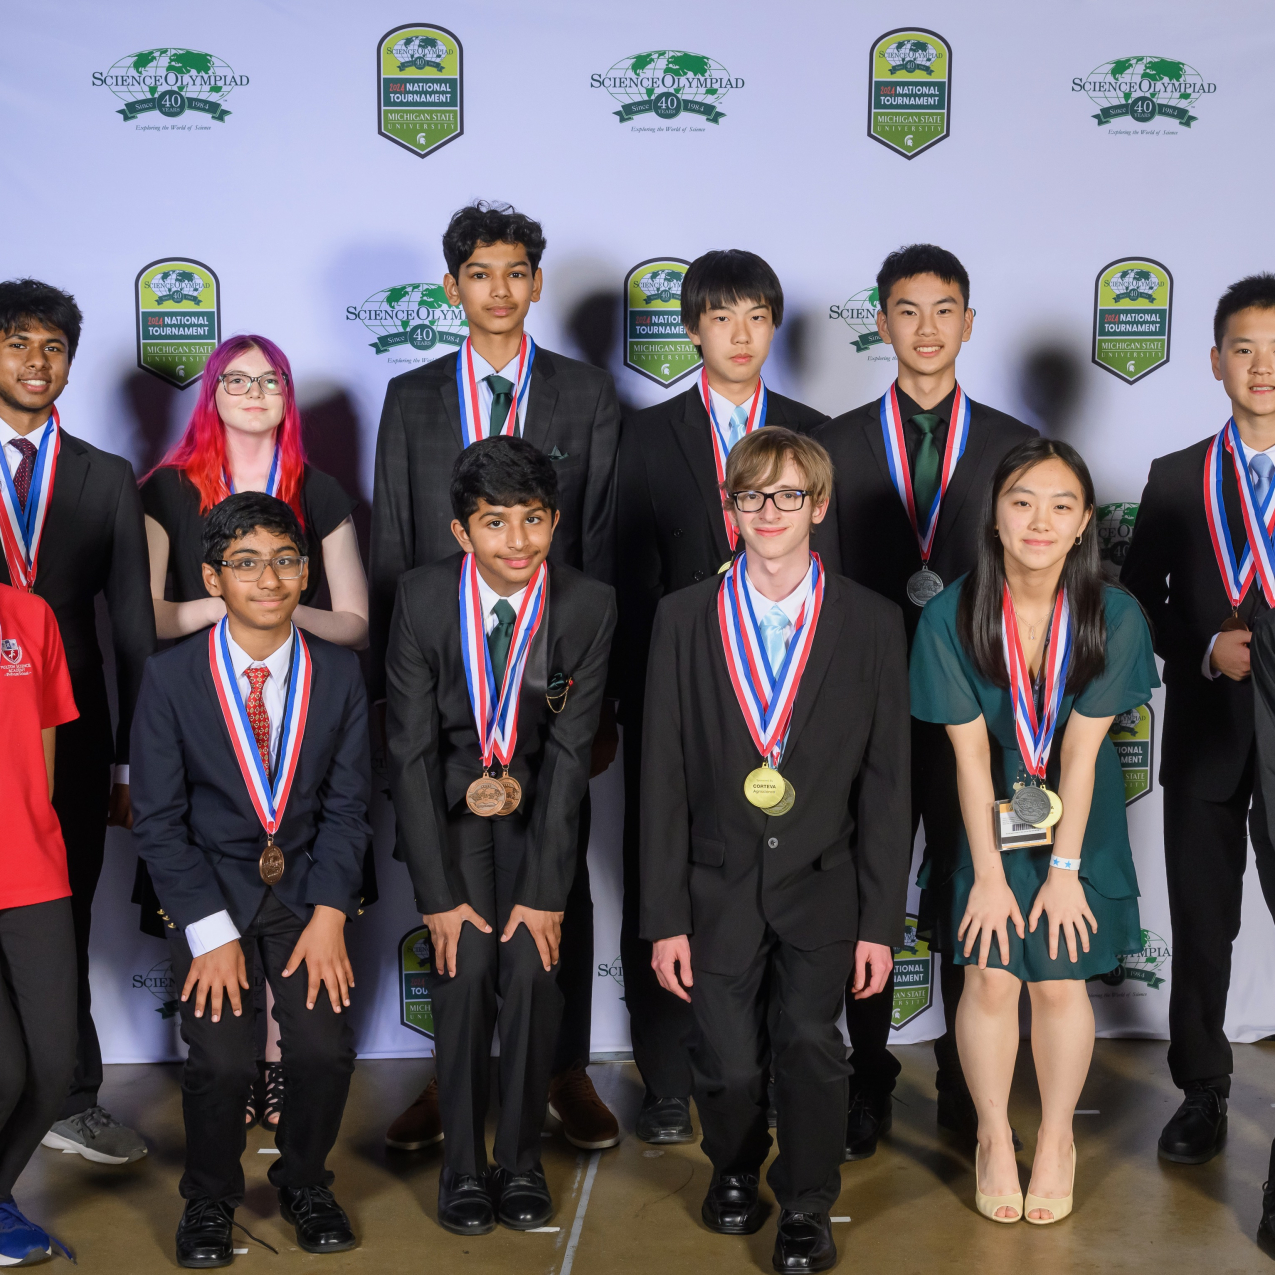 Twelve students dressed in formal attire pose for a group photo in front of a backdrop that has the 40th Science Olympiad National Tournament logo on it. 